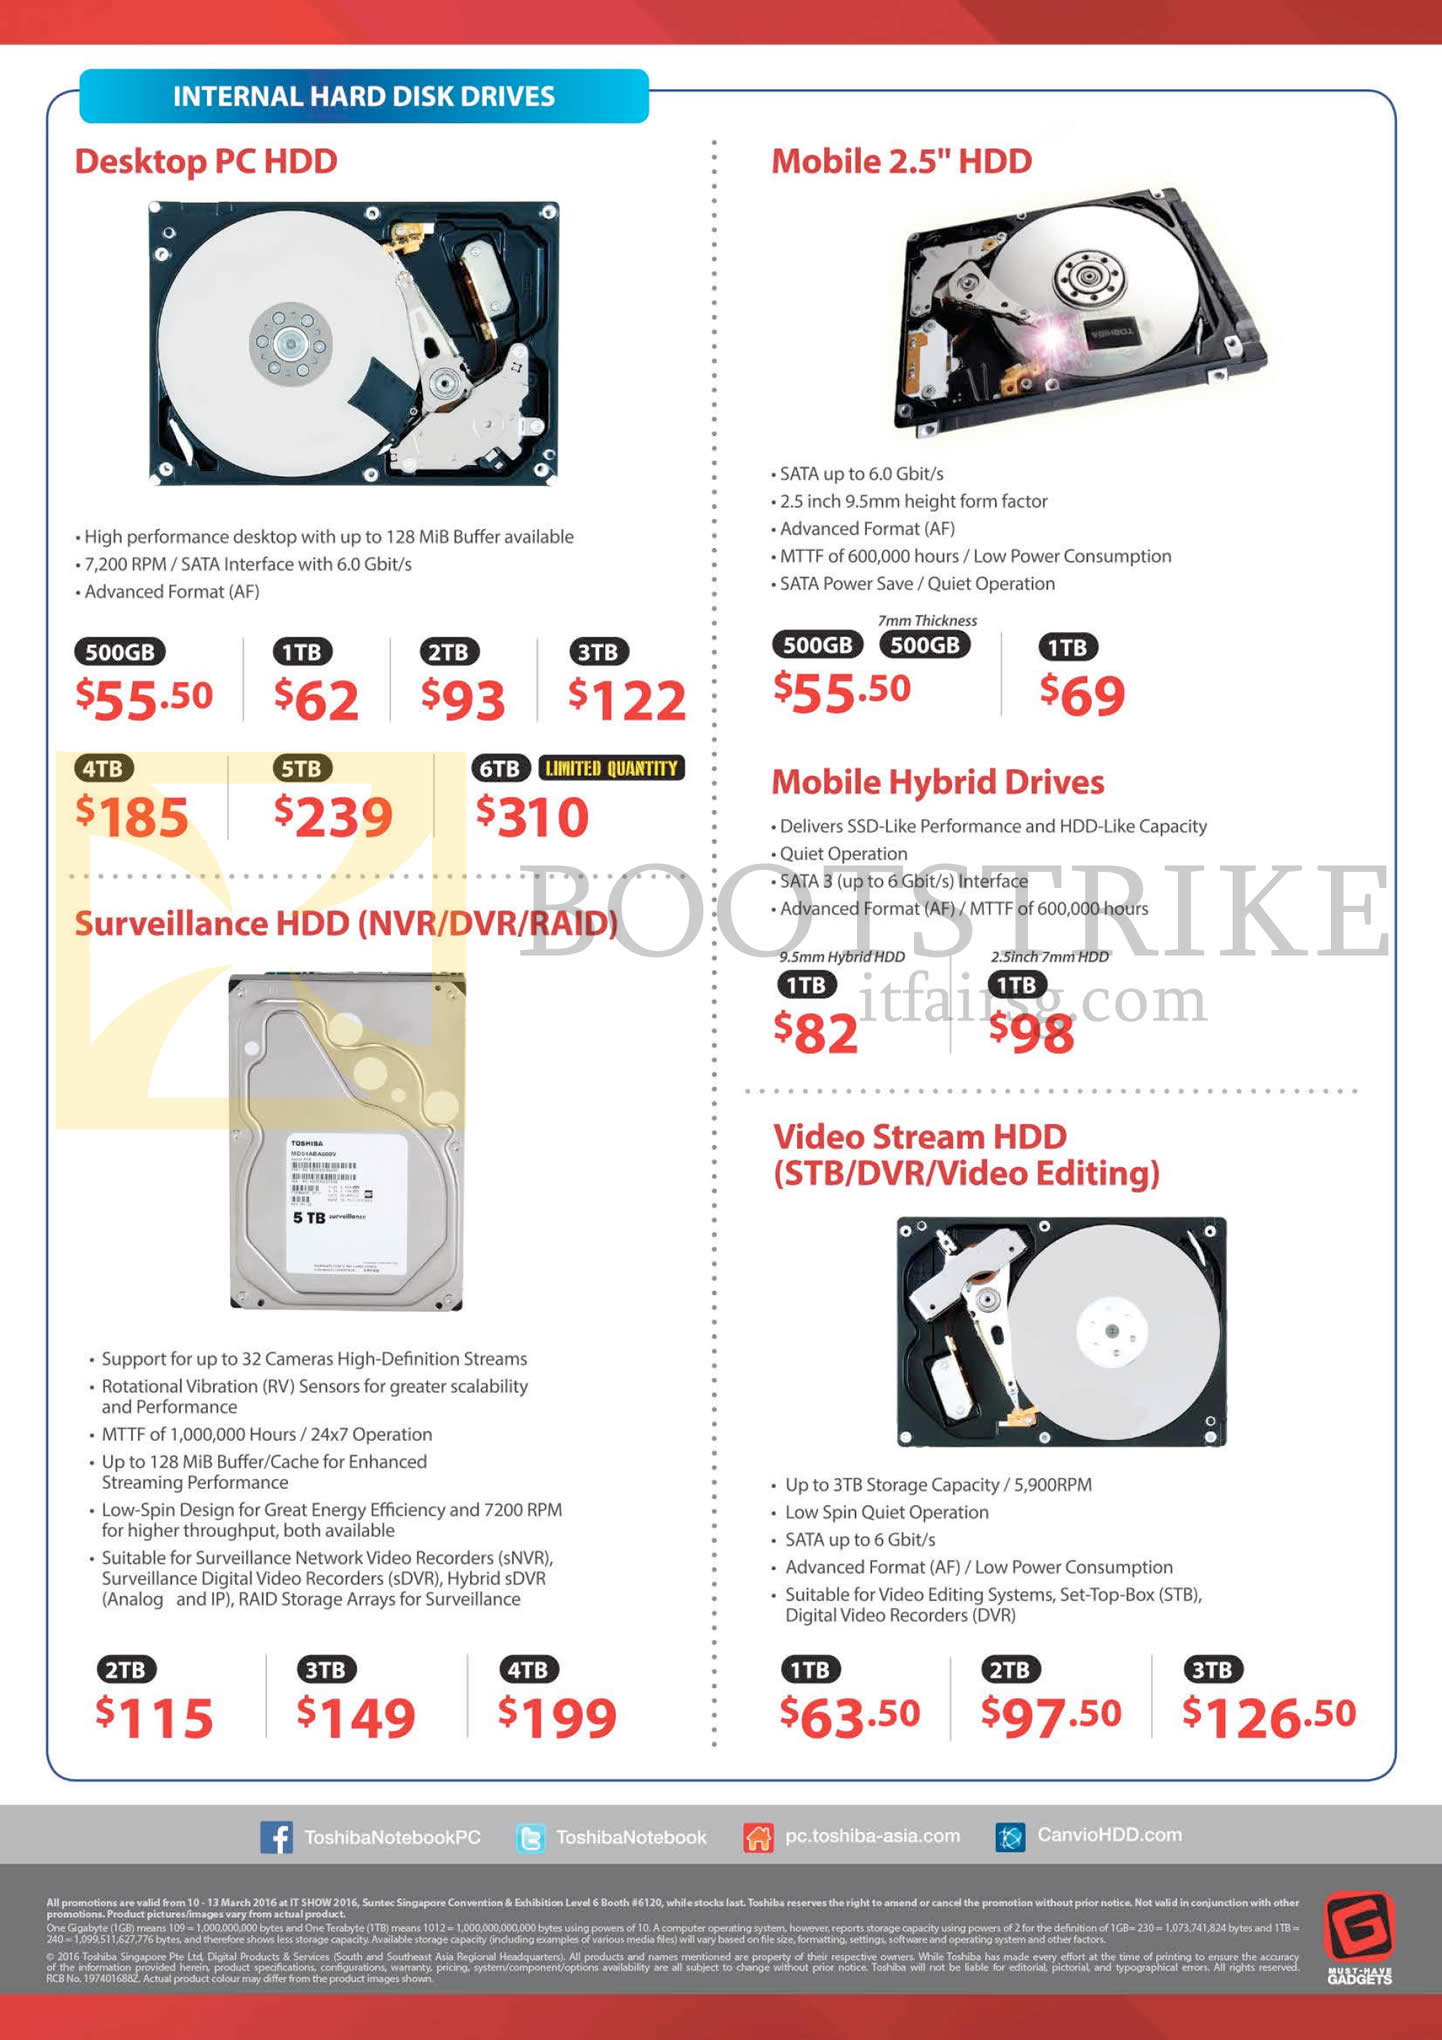 IT SHOW 2016 price list image brochure of Toshiba Desktop PC HDD, Mobile 2.5 HDD, Surveillance HDD, Video Stream HDD